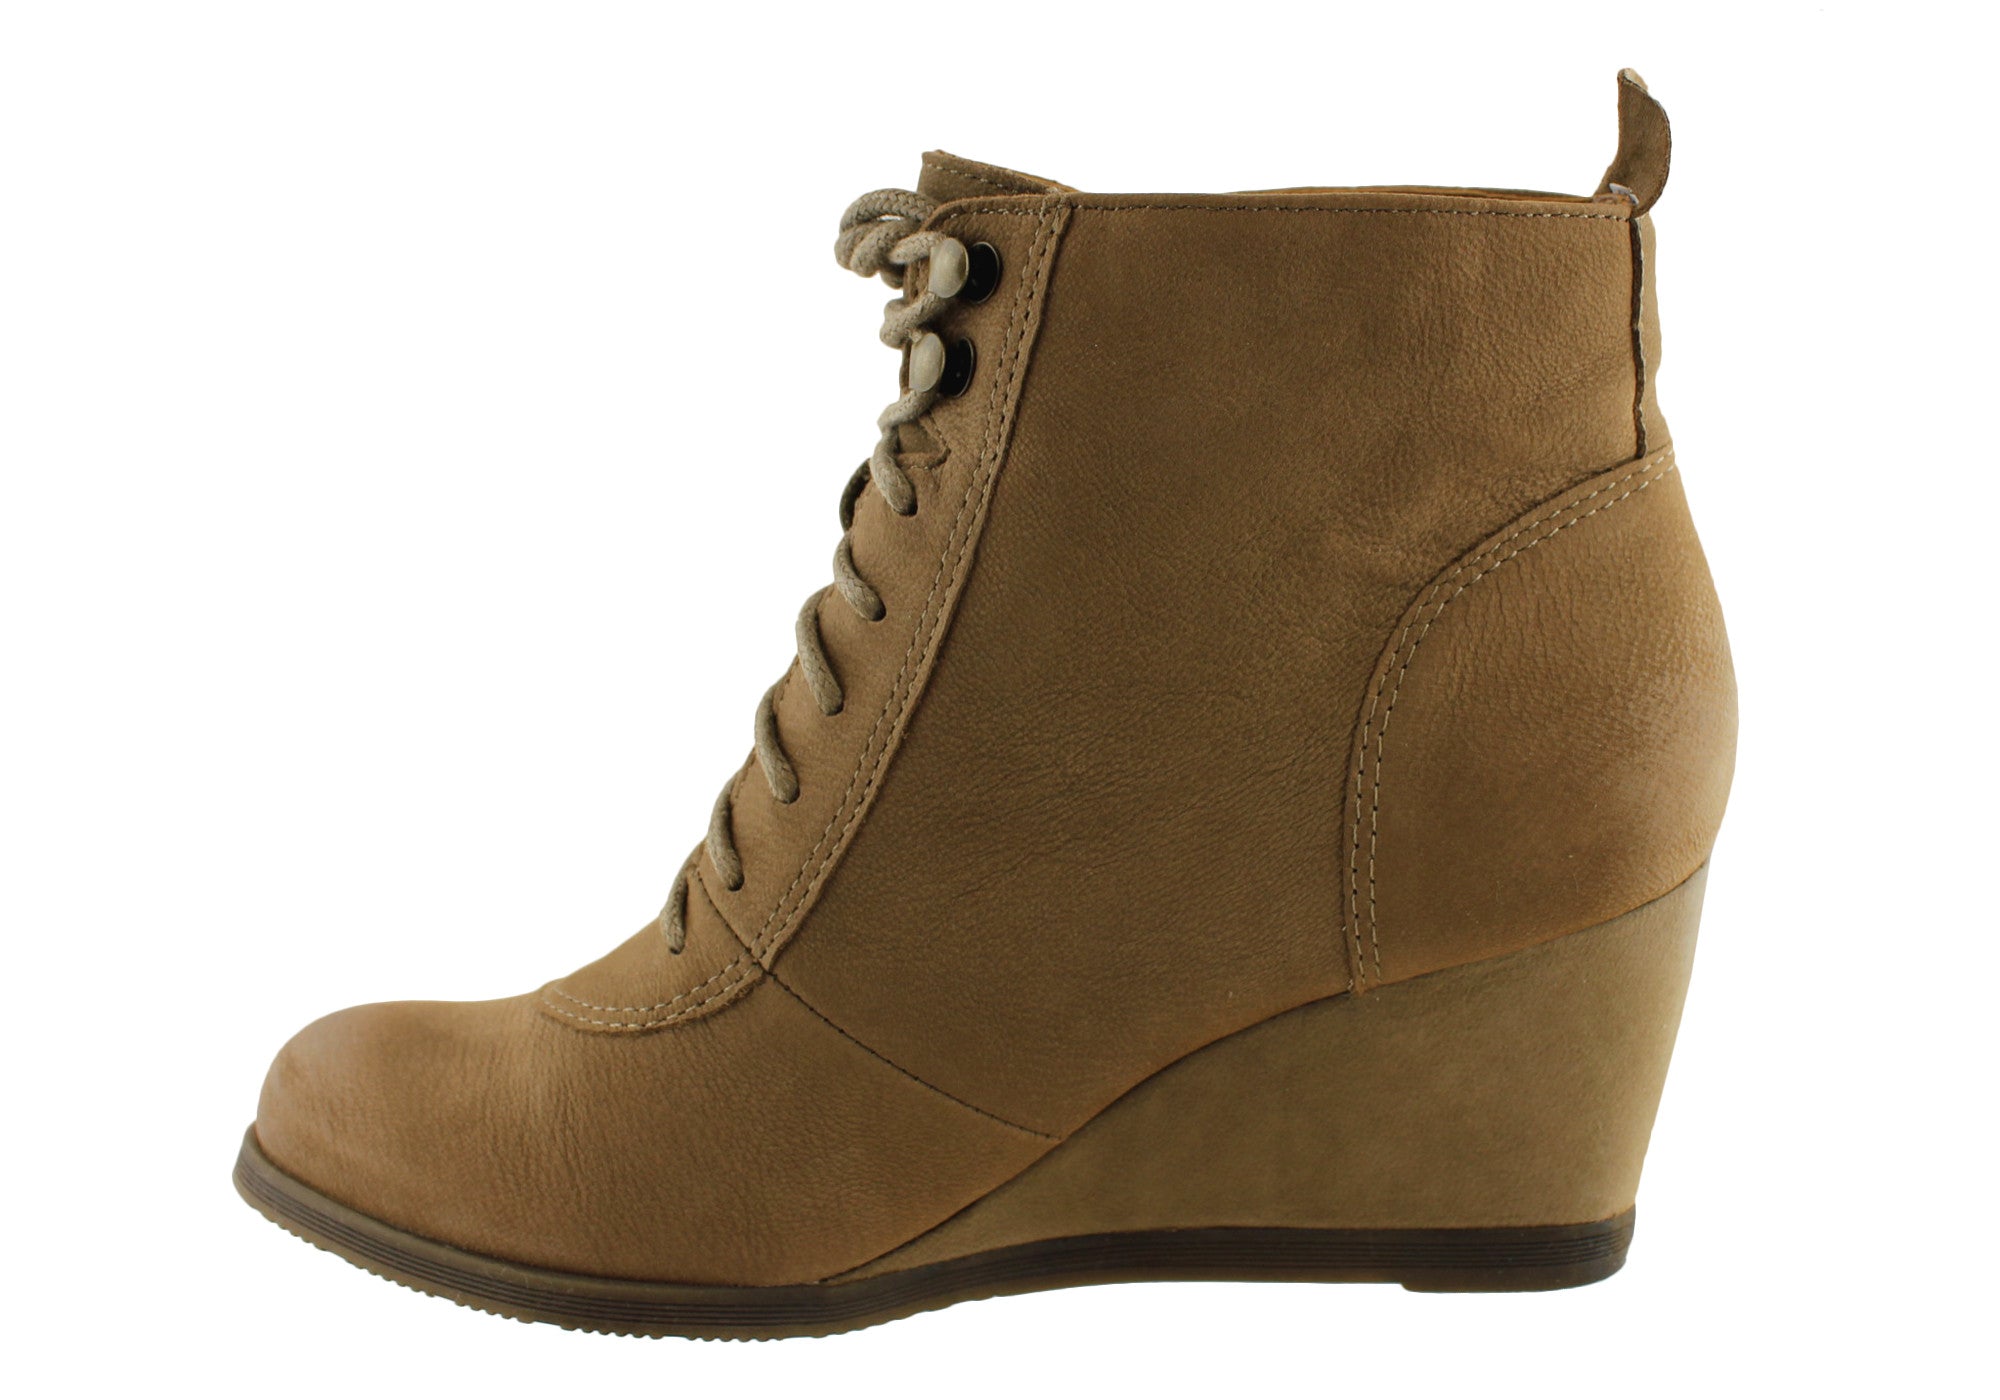 Hush Puppies Jade Womens Fashion Leather Ankle Boots | Brand House Direct